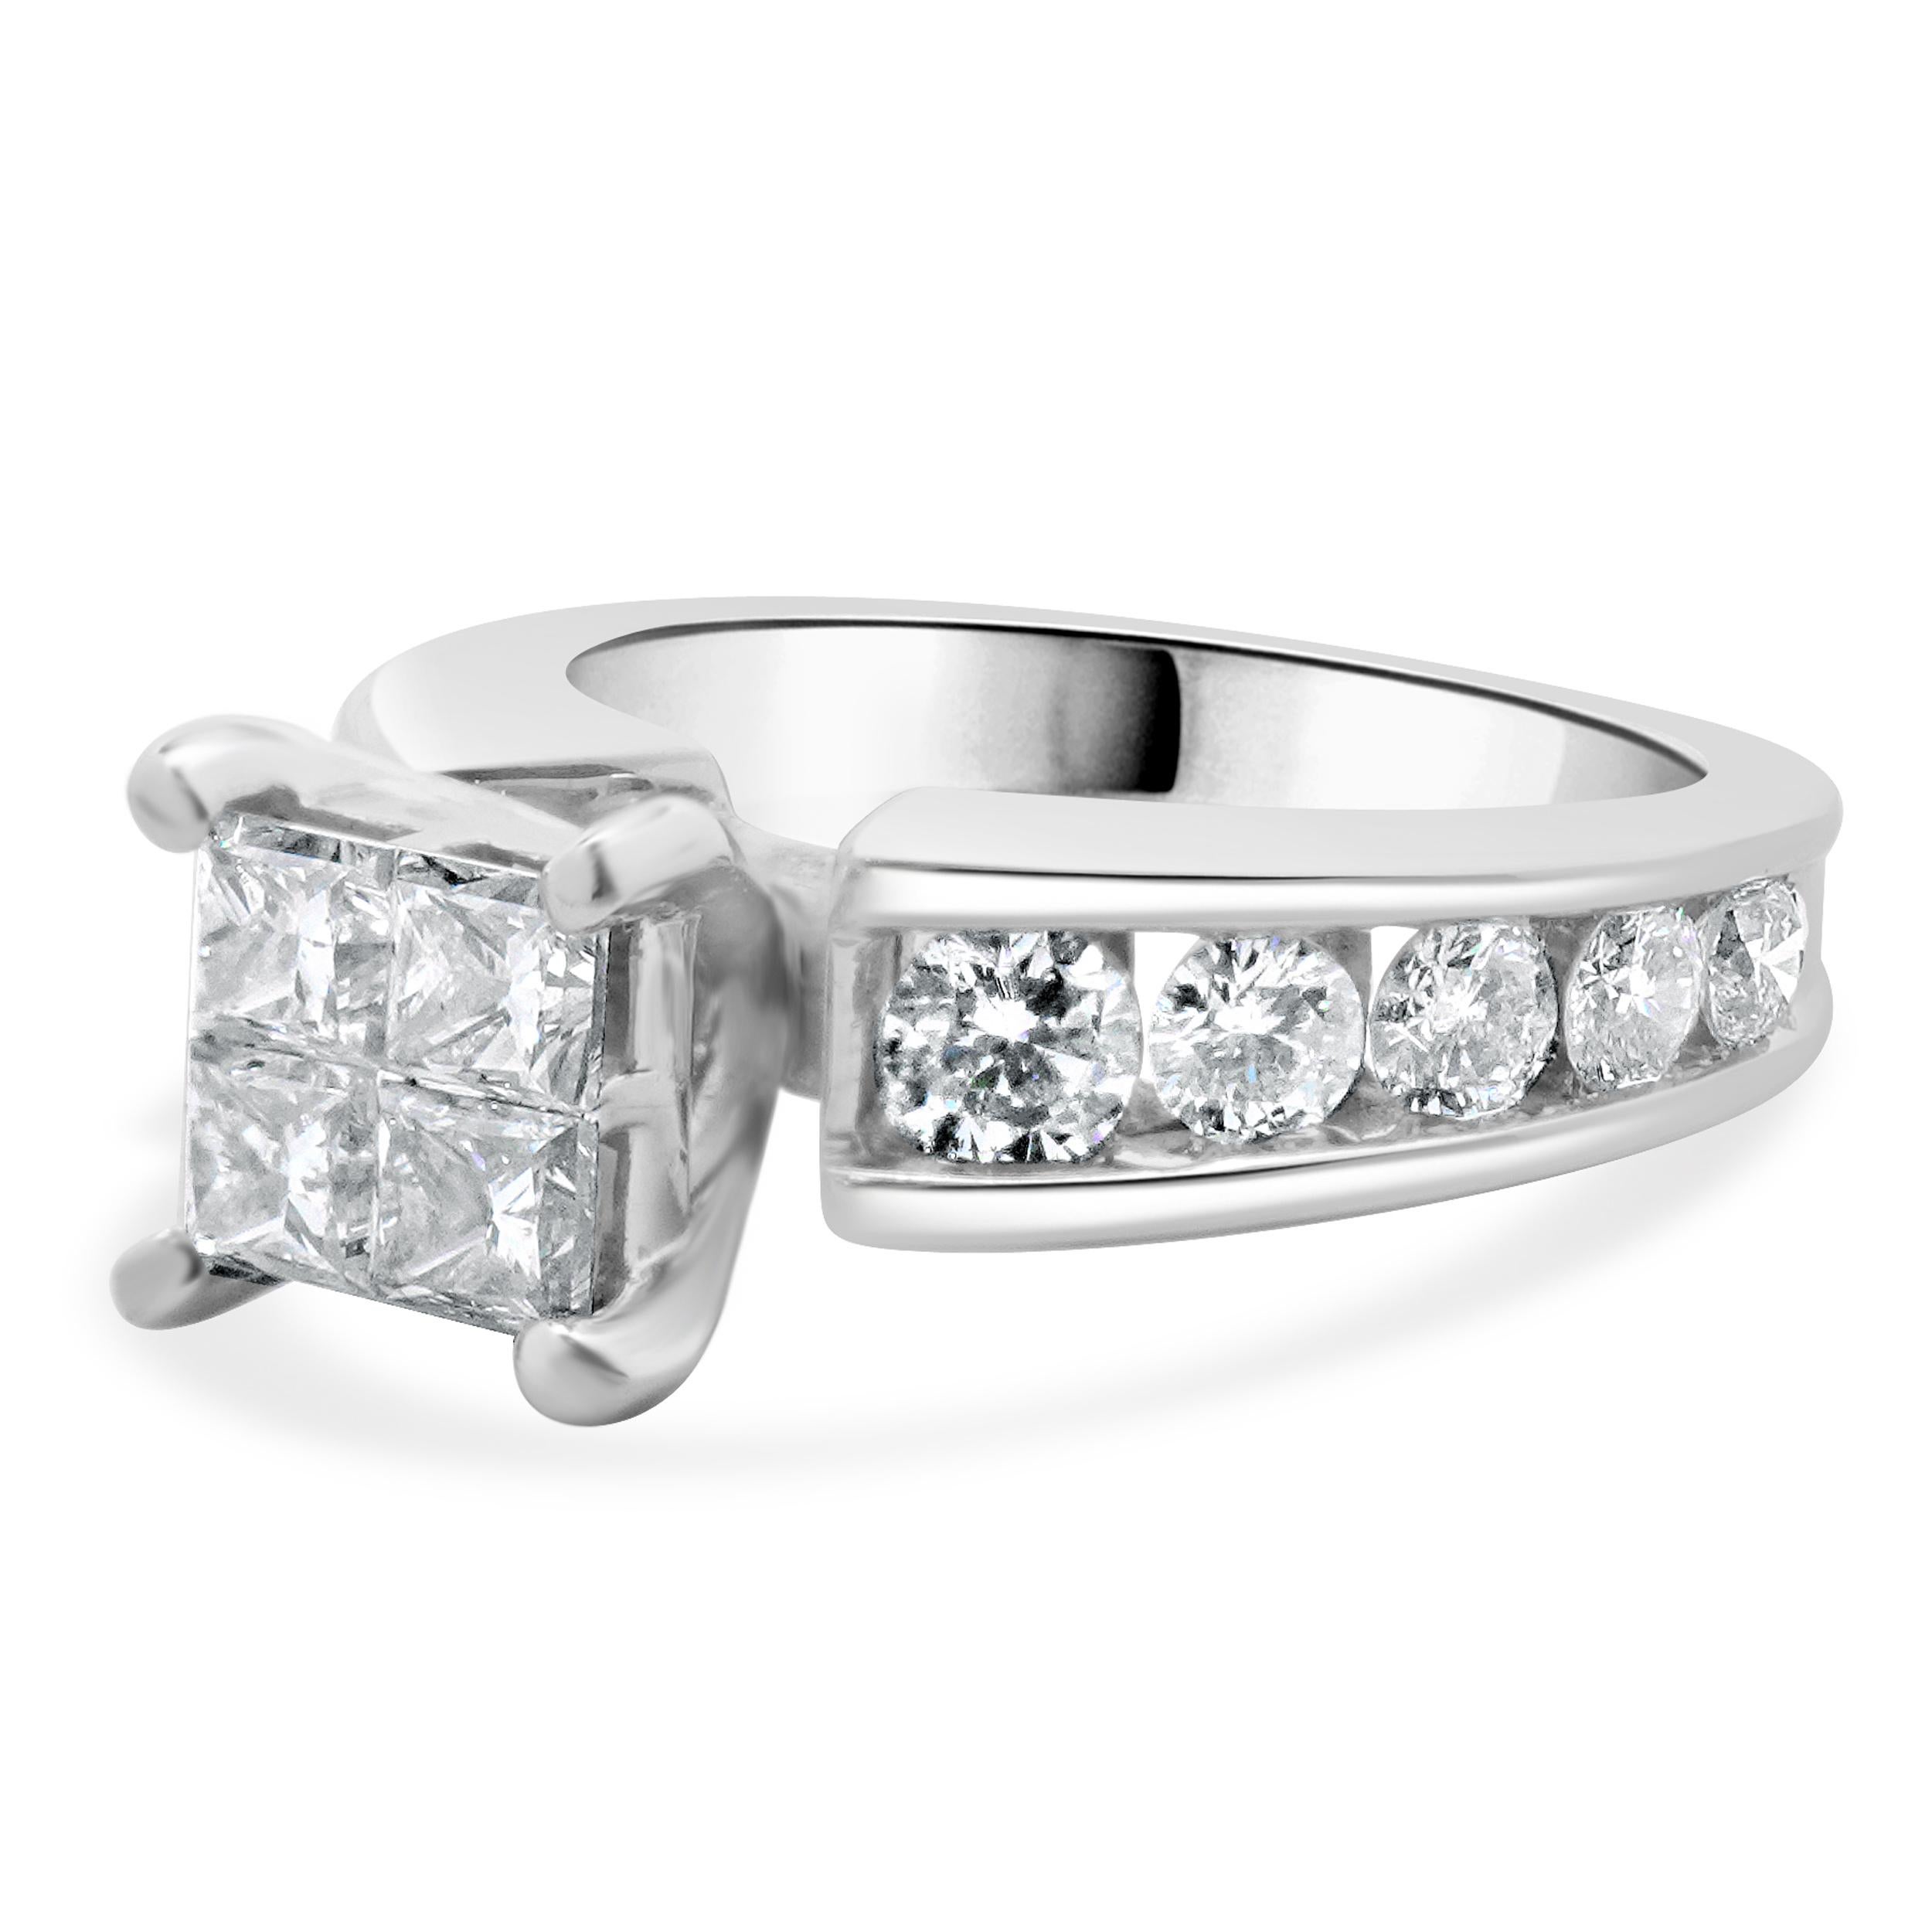 Designer: custom
Material: 14K white gold
Diamond: 4 princess cut = 0.76cttw
Color: I
Clarity: I1
Diamond: 10 round brilliant cut = 0.88cttw
Color: I
Clarity: SI2-I1
Dimensions: ring top measures 8.10mm wide
Ring Size: 4.25 (complimentary sizing